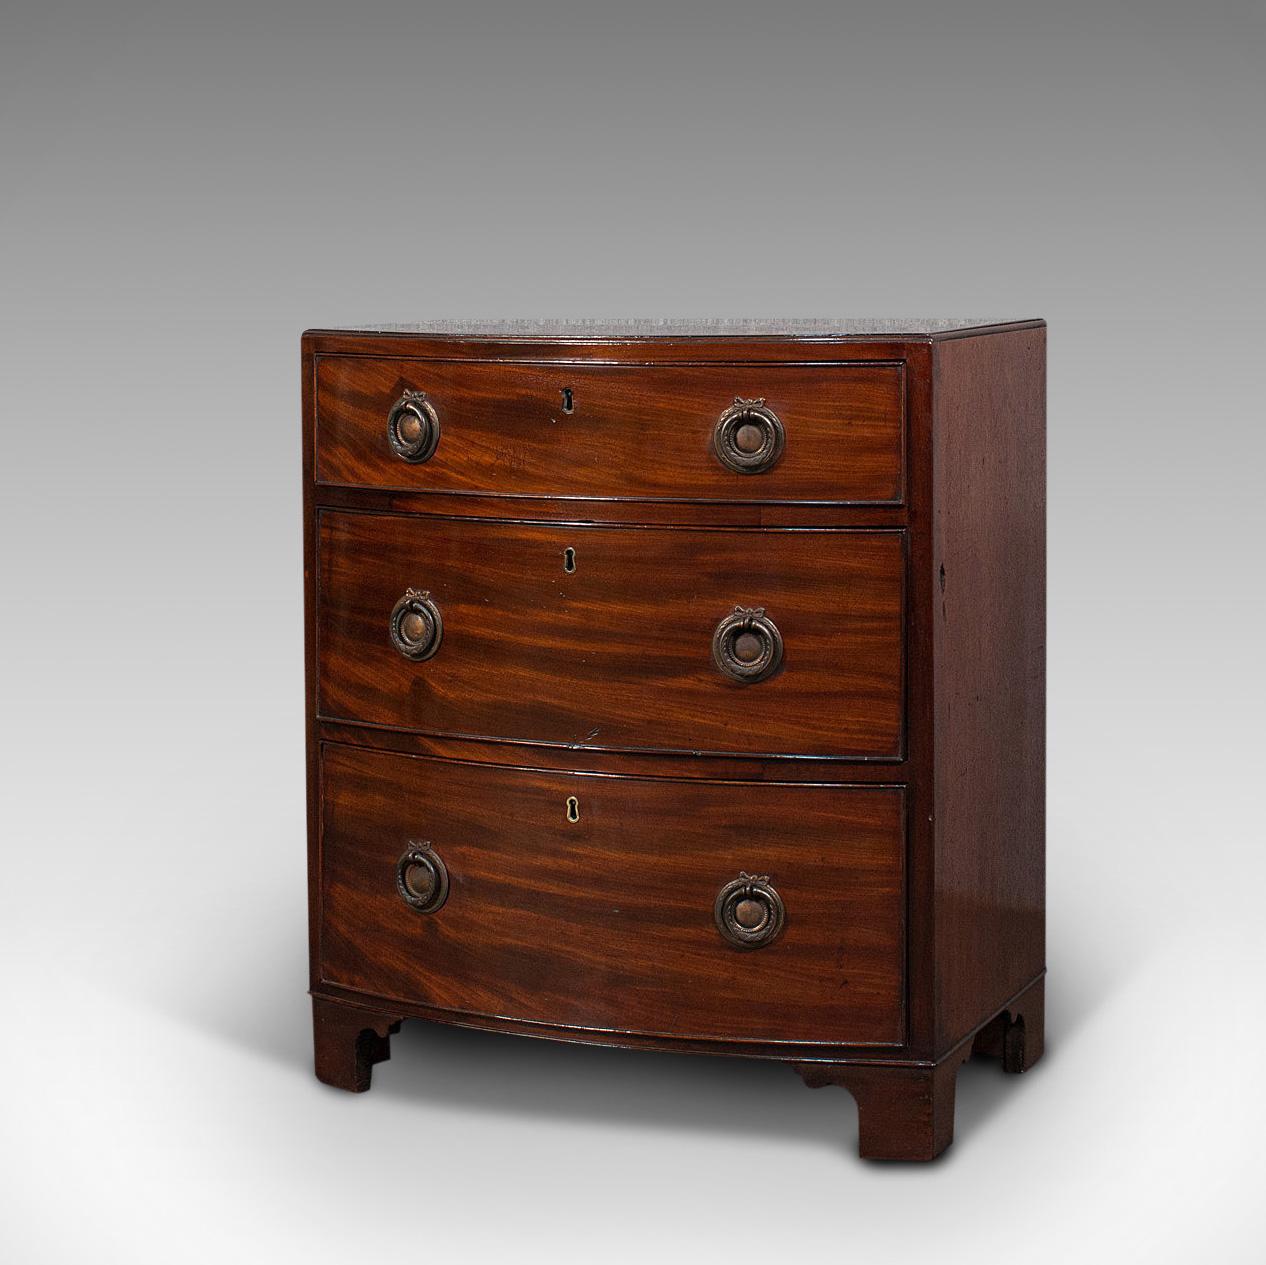 This is a superb, compact antique chest of drawers. An English, mahogany bedside stand, dating to the Georgian period, circa 1780.

An abundance of Georgian appeal with striking mahogany stocks
Displaying a desirable aged patina
Select mahogany